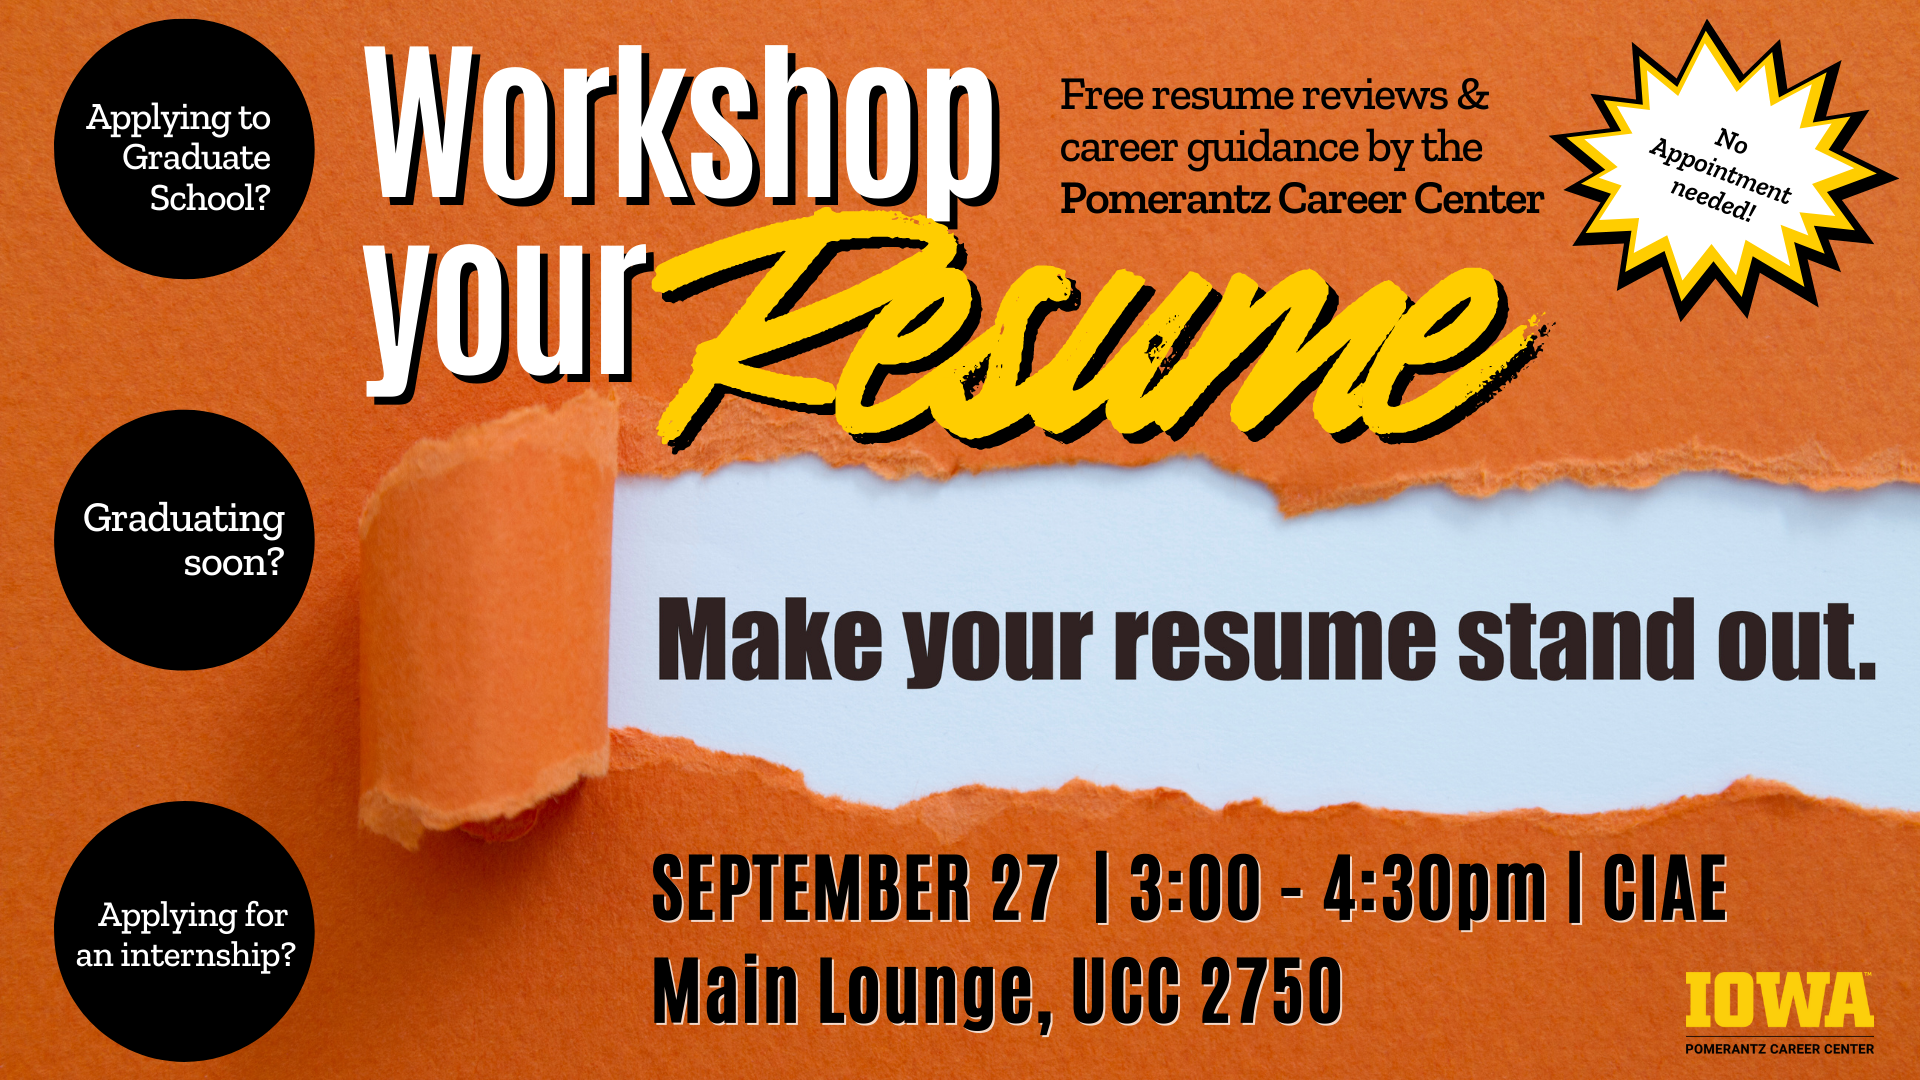 Workshop your resume at the CIAE Sep 27 3-4:30 pm